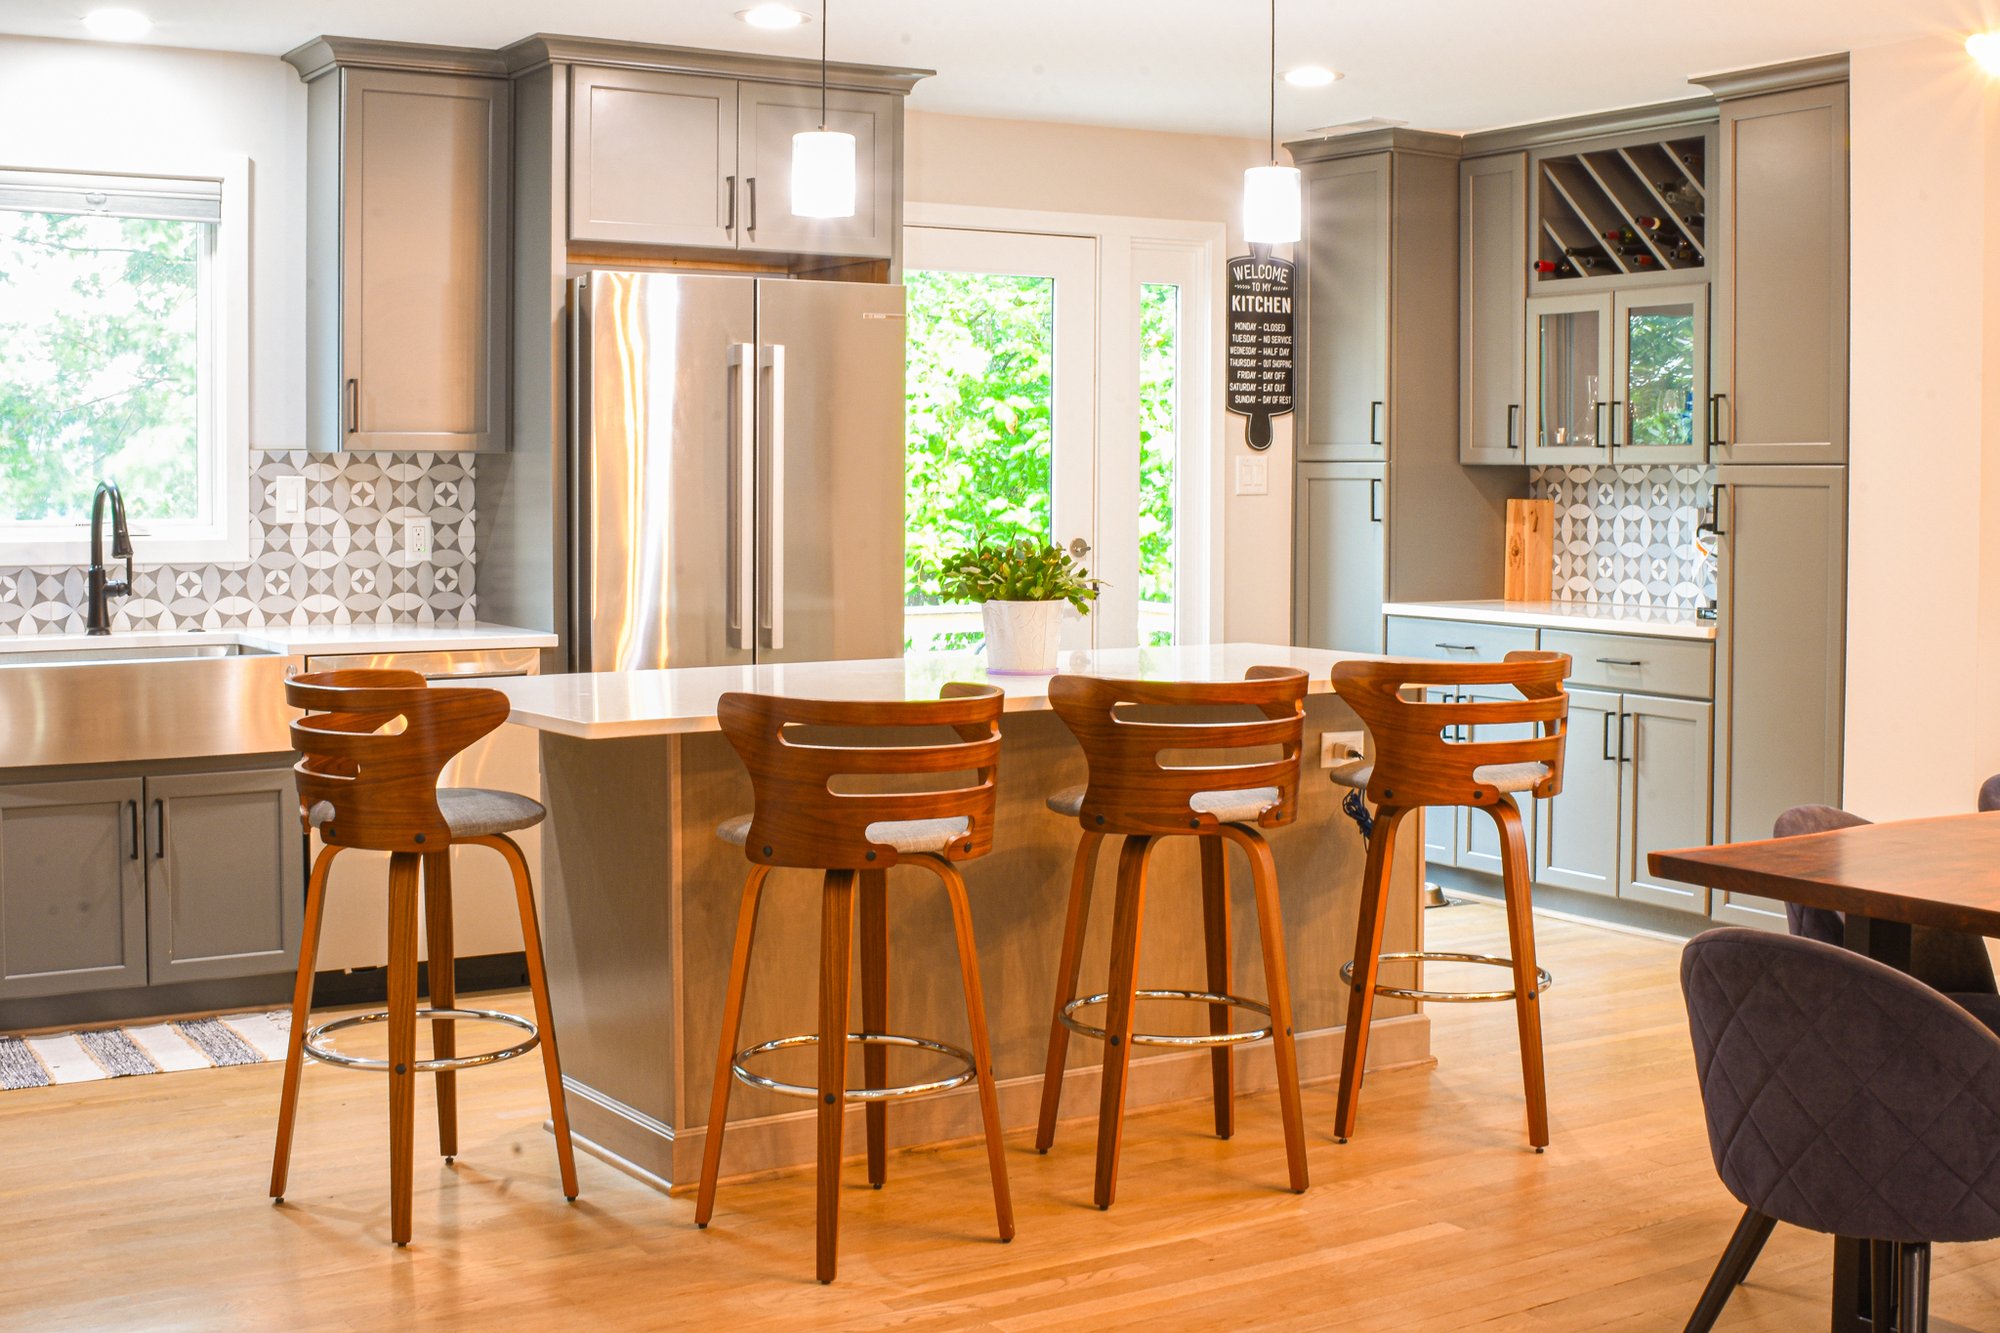 Well lit kitchen island with four wooden bar stool chairs for serving and entertaining